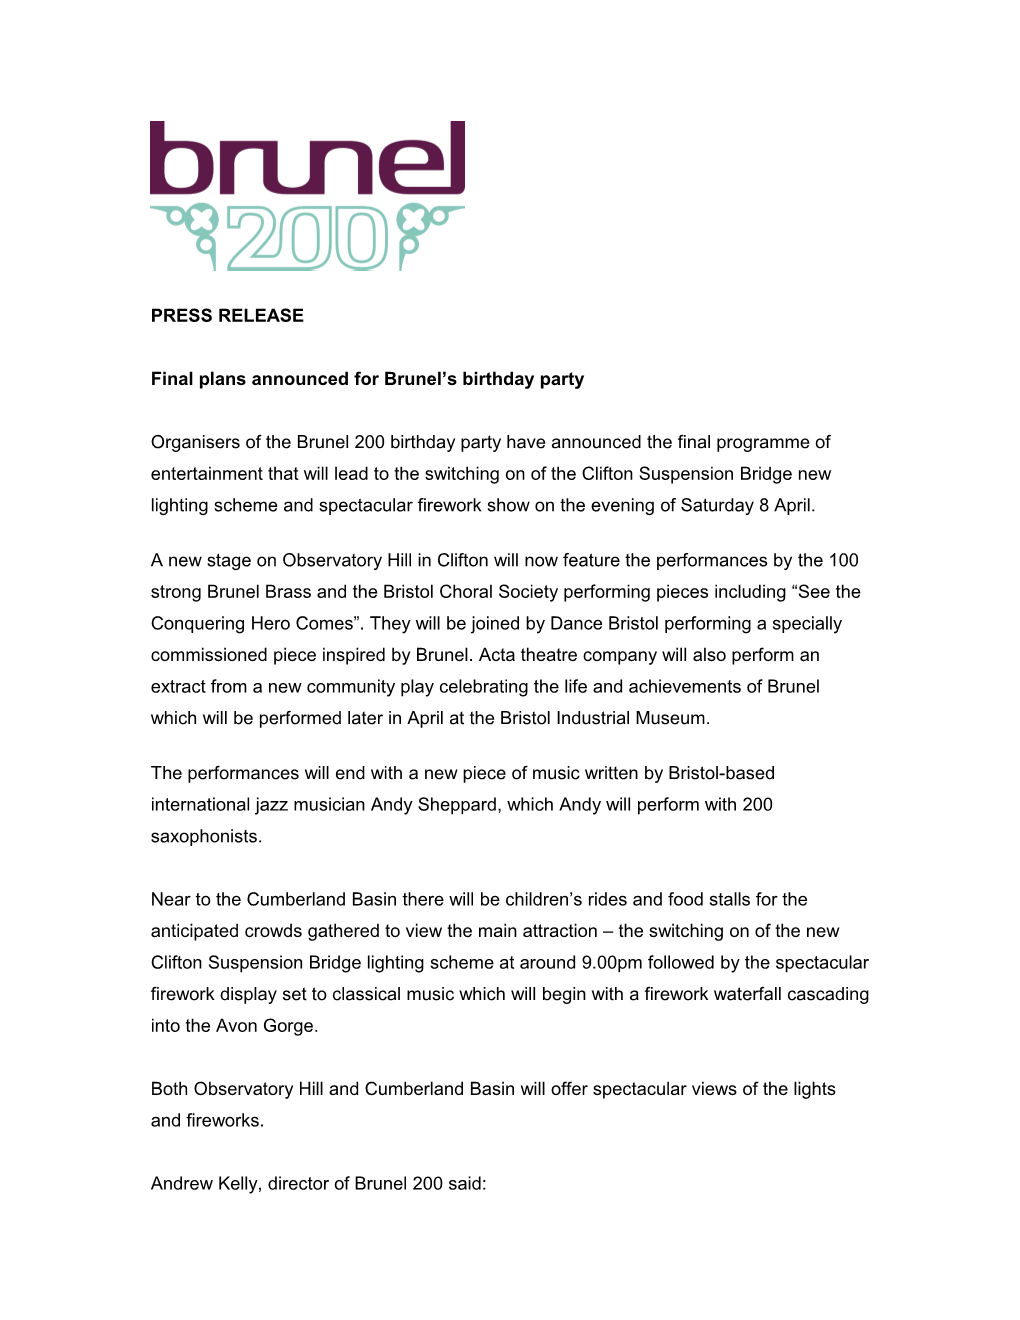 Thousands of People Are Expected to Join Brunel S Open Air Birthday Party on April 8Th